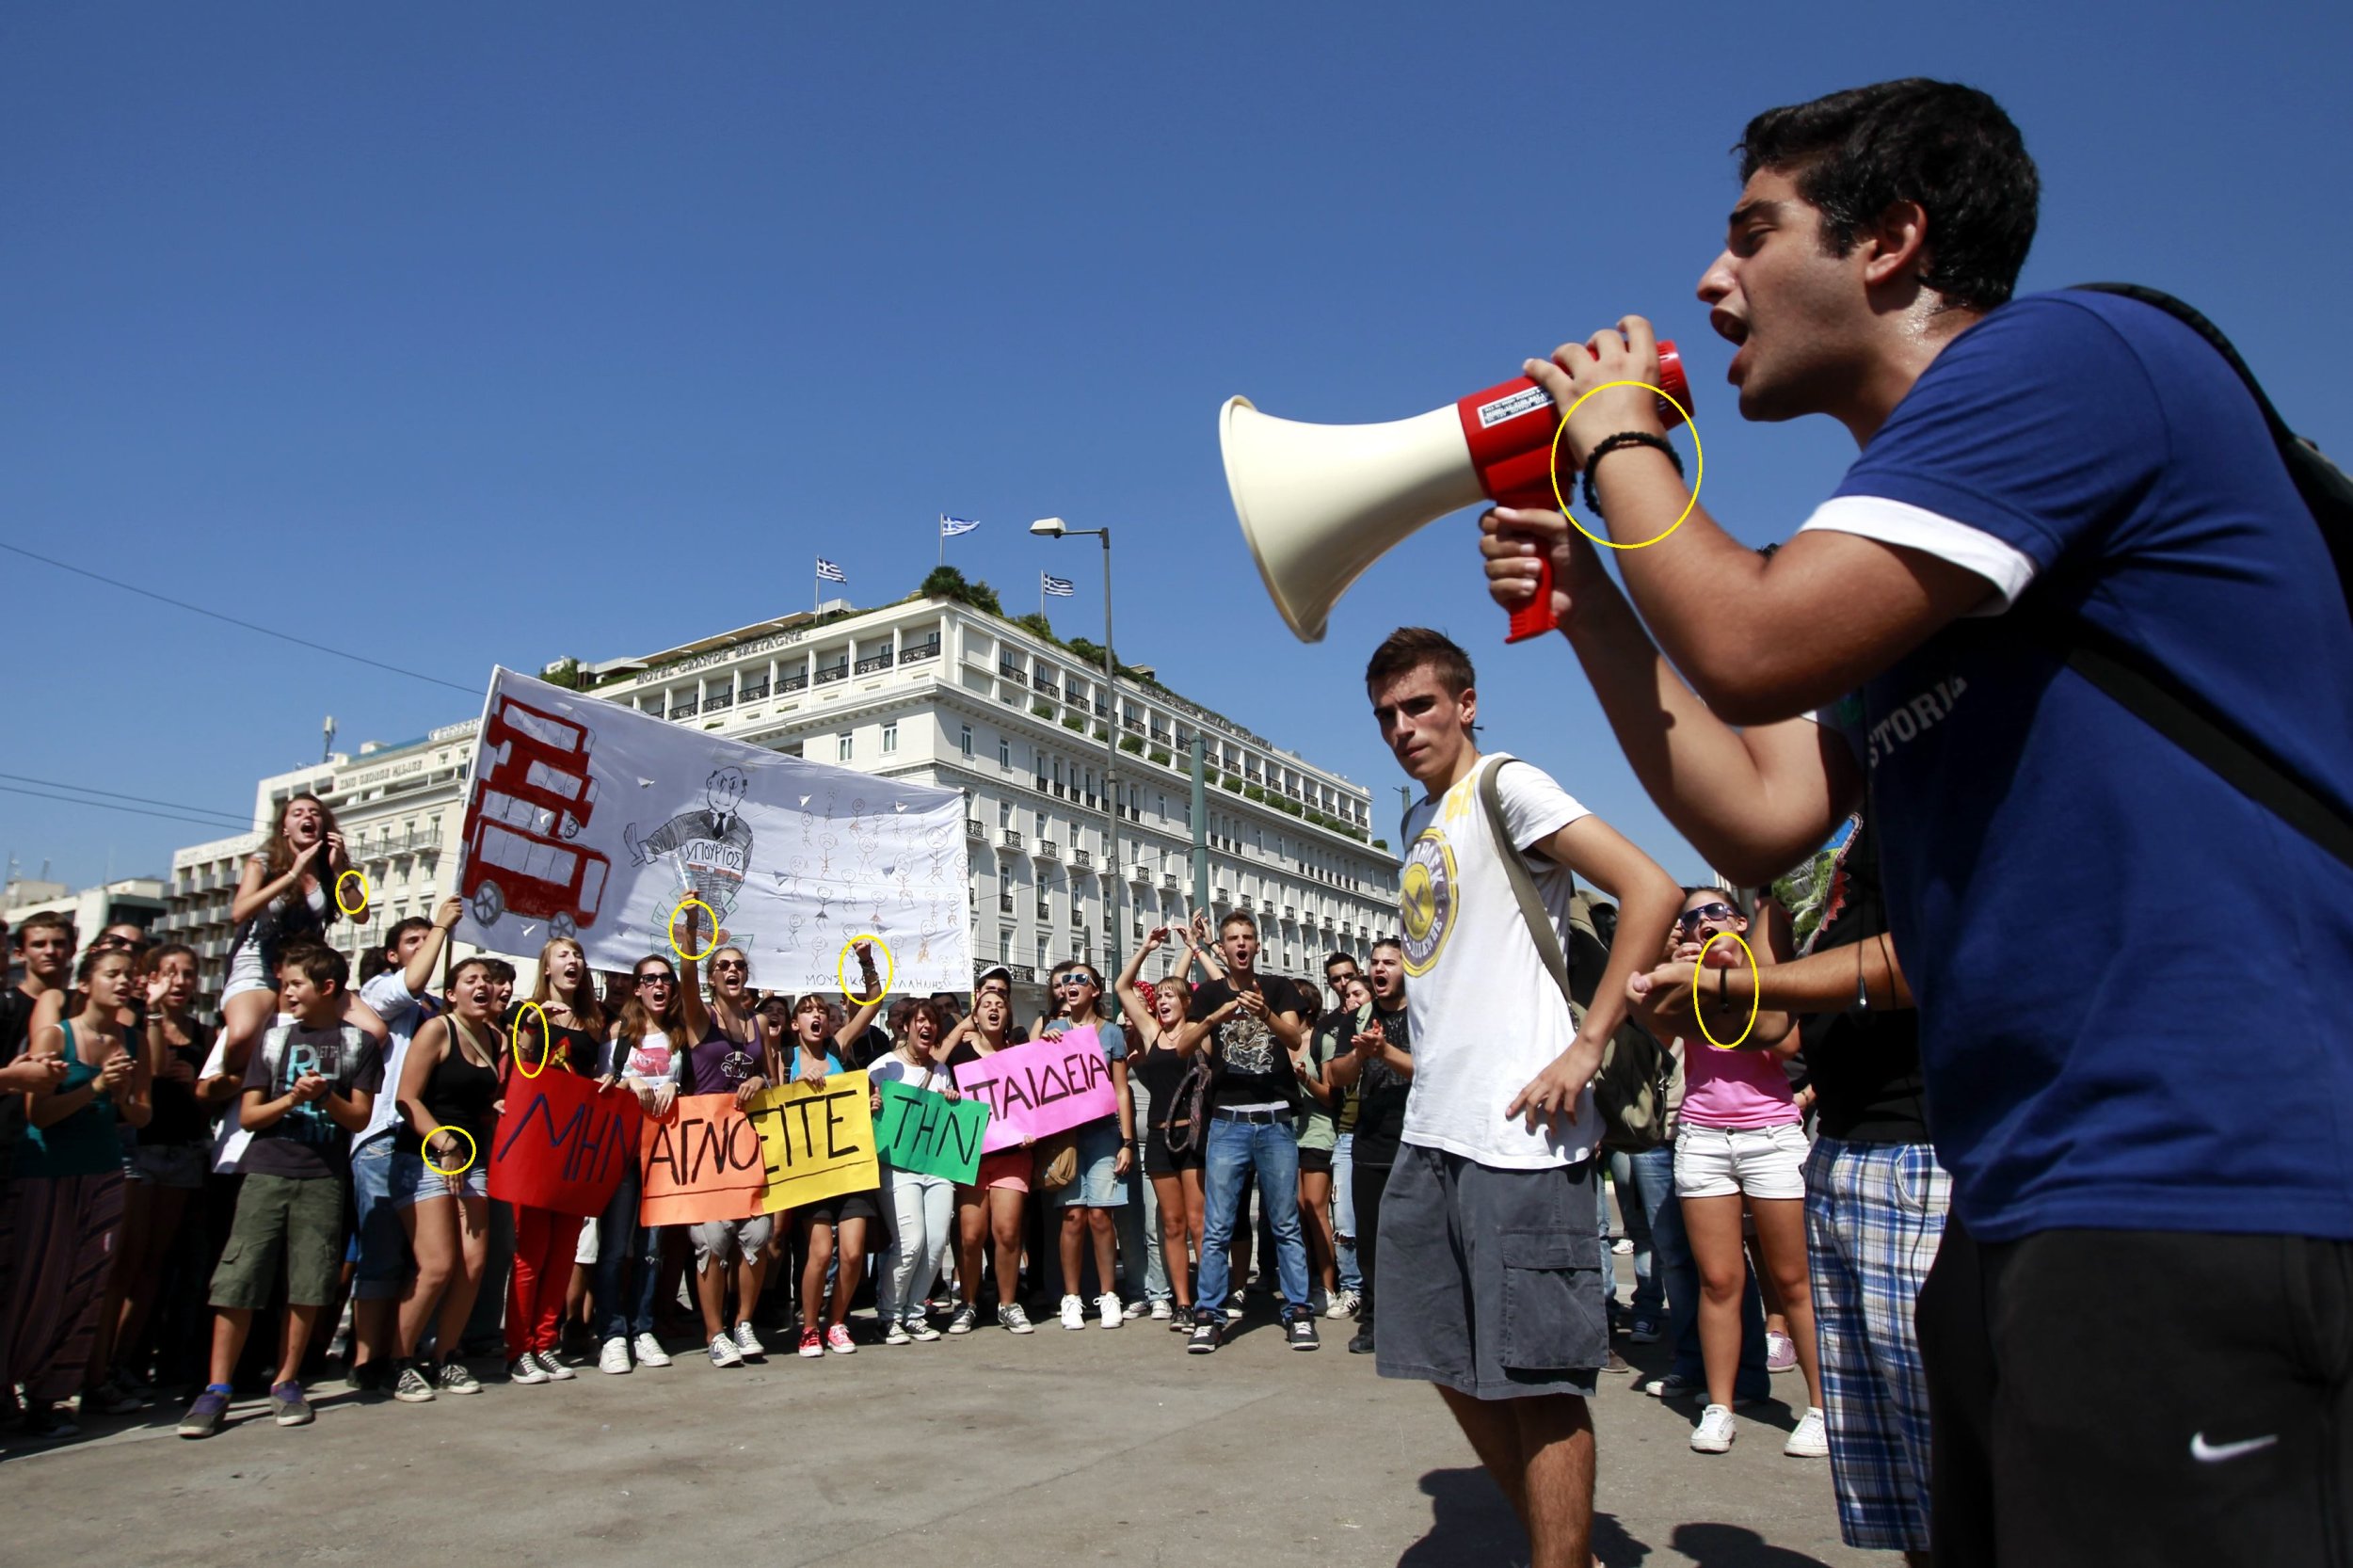 A student leads a rally against cuts to education spending, in Athens, on October 2.